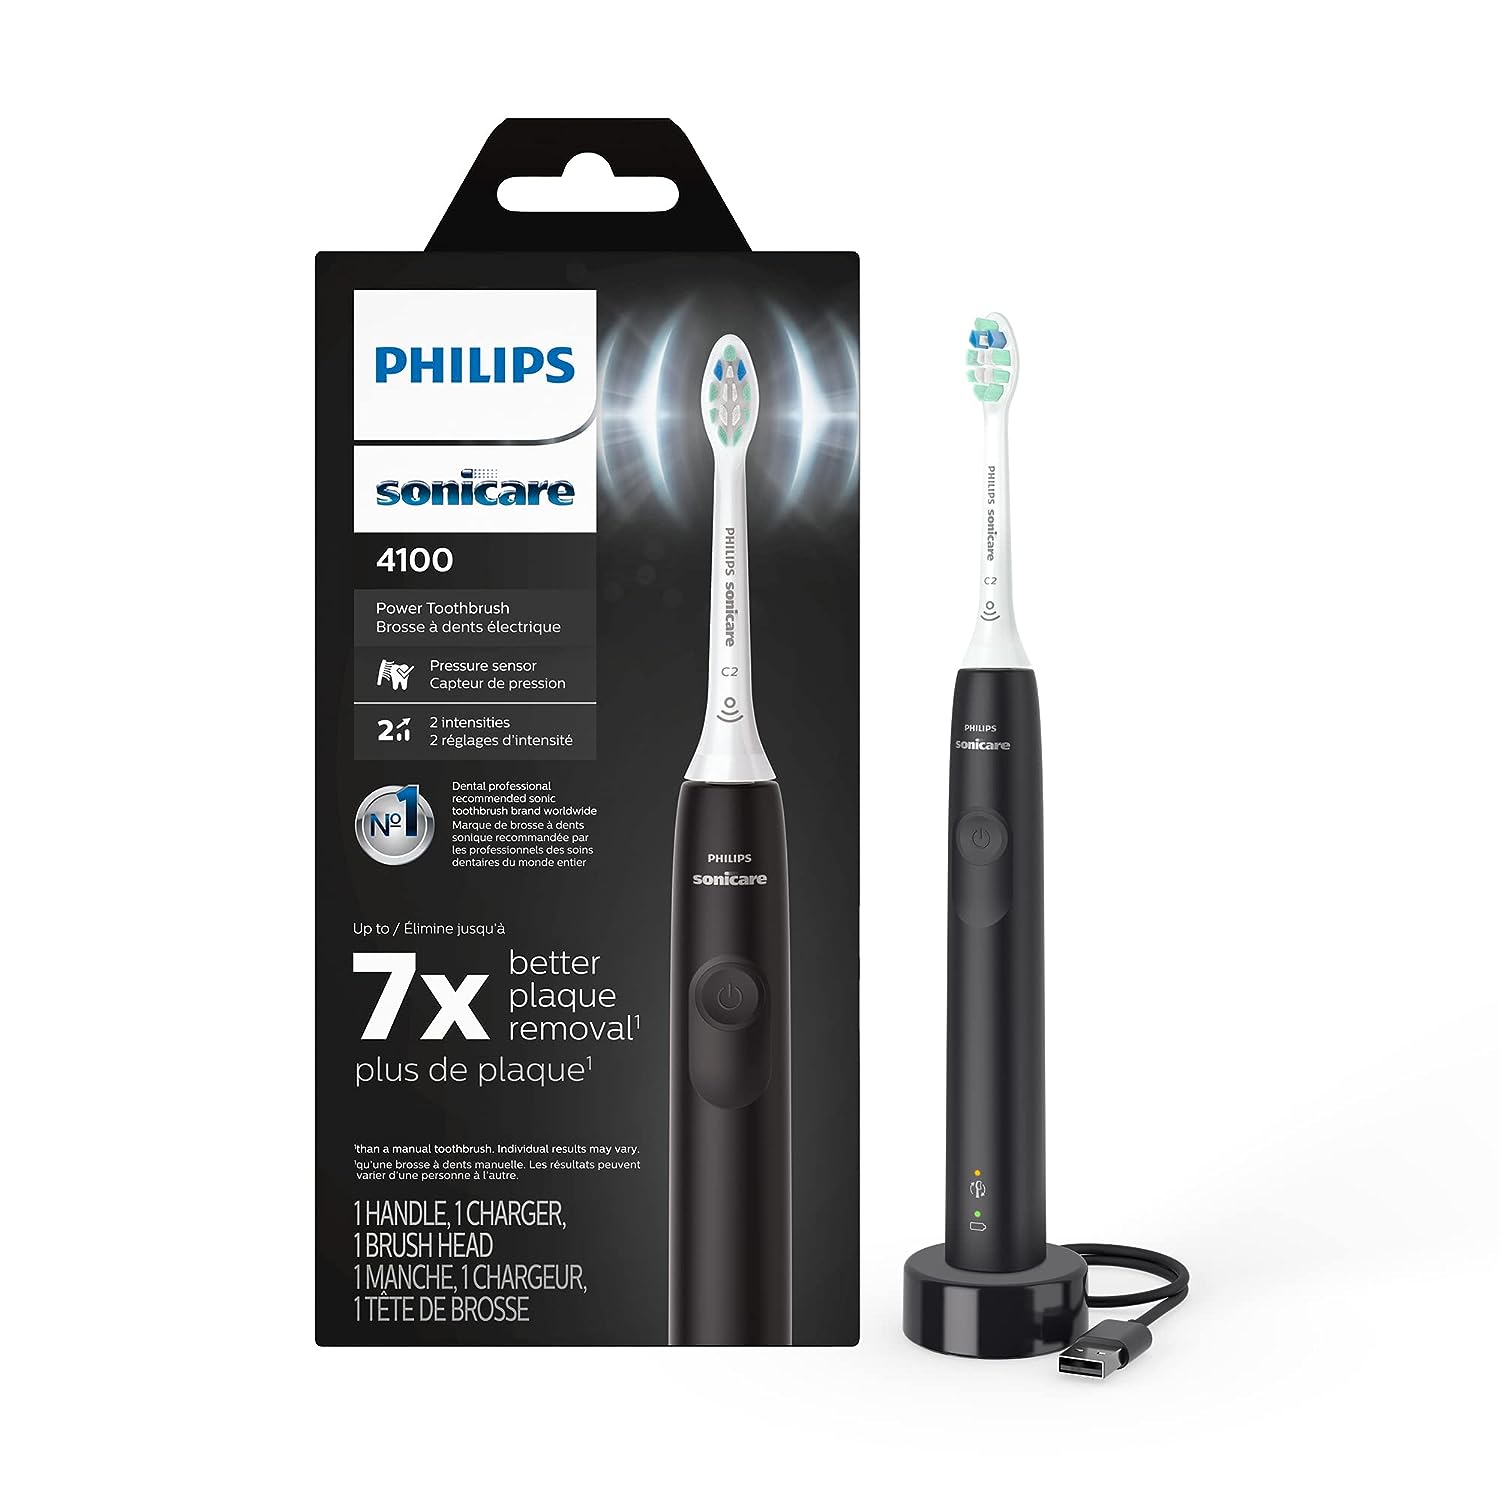  Best Quality Rechargeable Electric Toothbrush